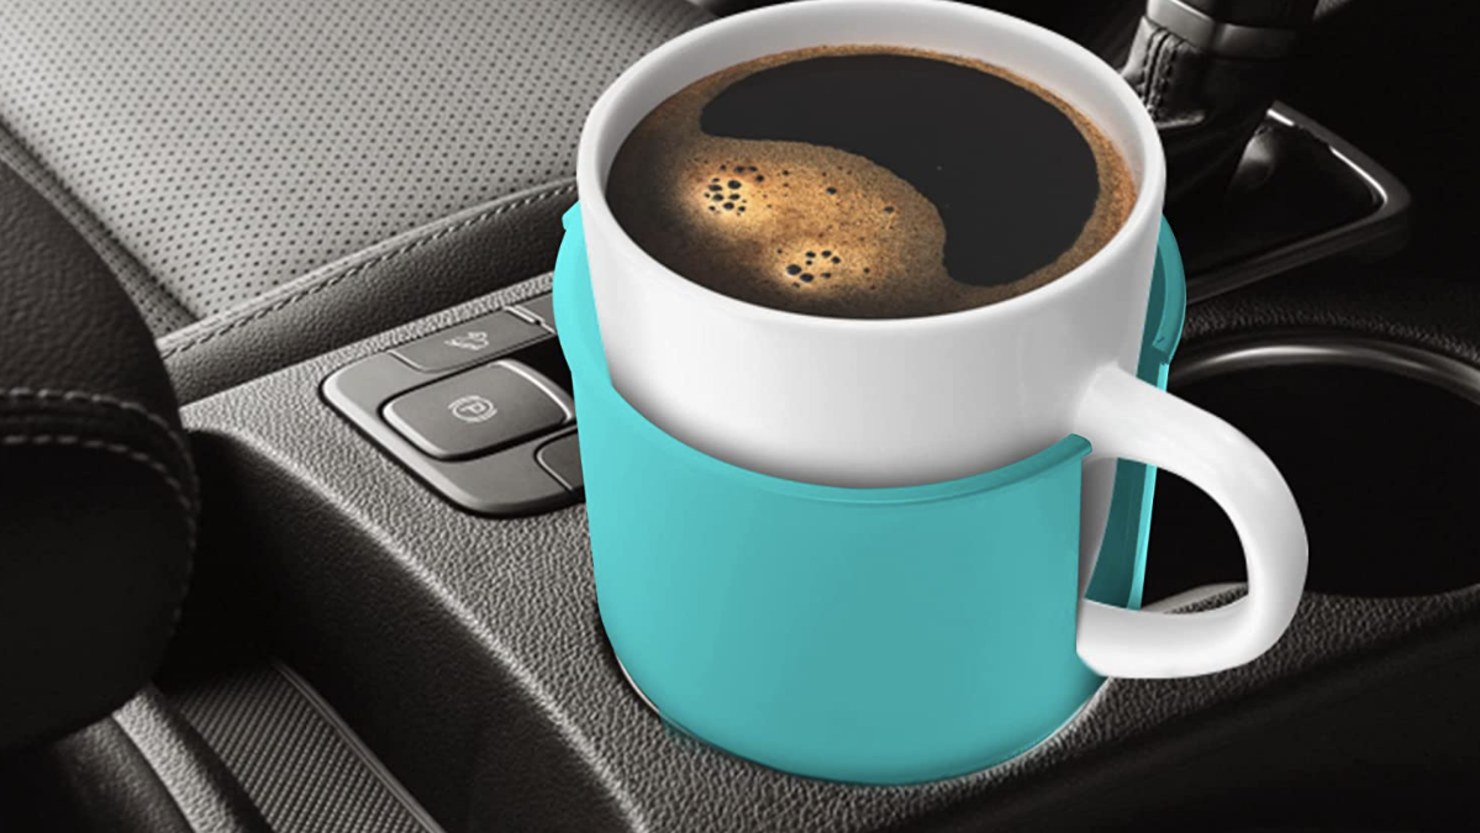 My Kingdom for a Cup Holder